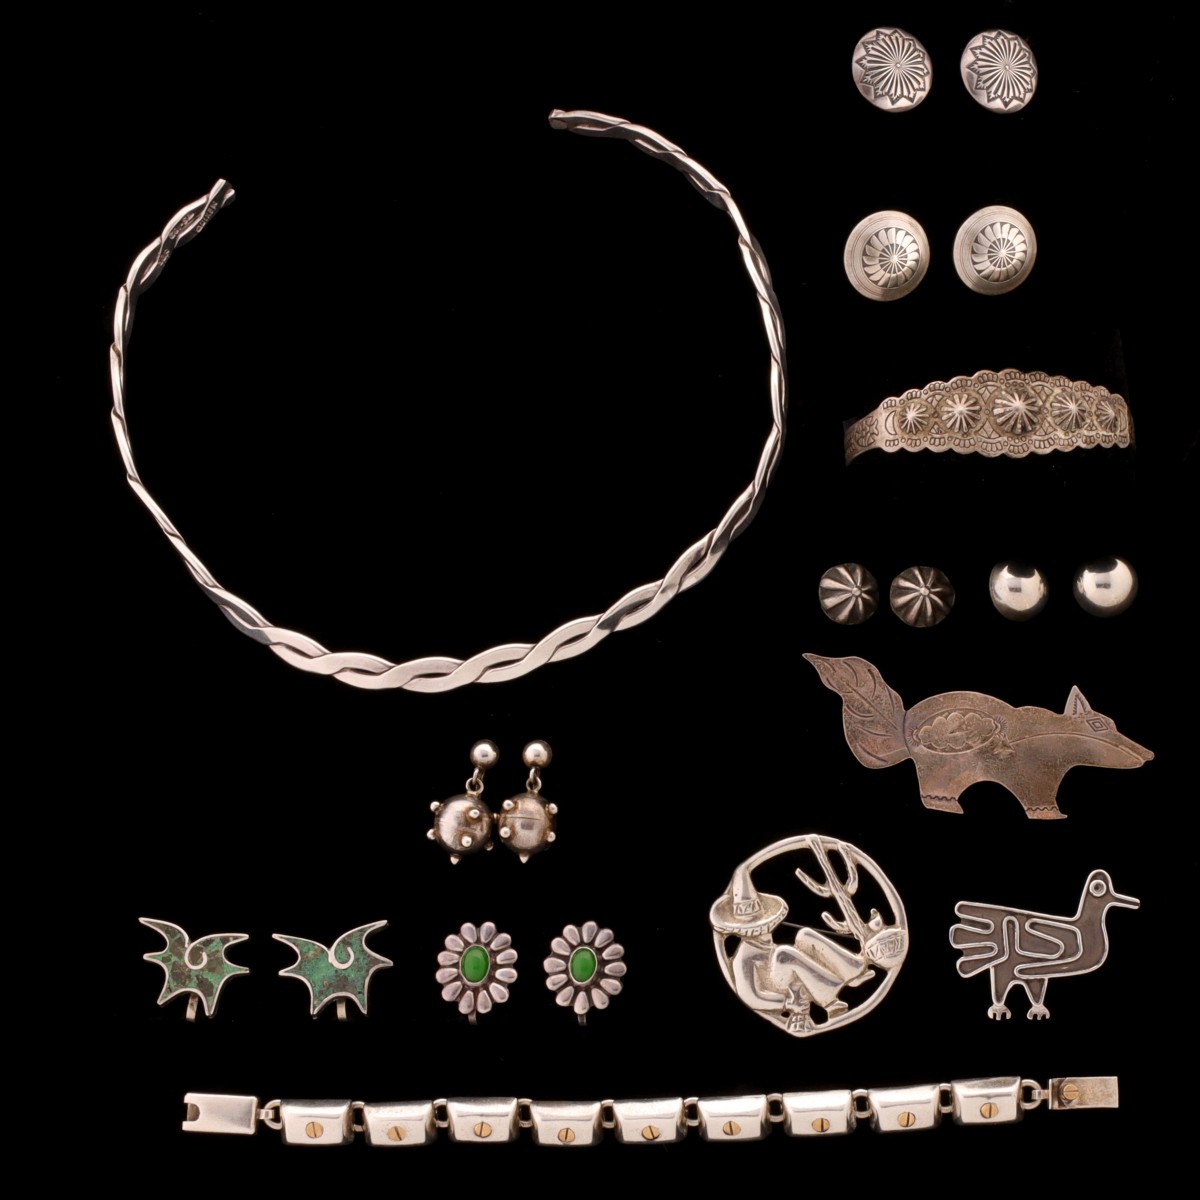 A COLLECTION OF MEXICAN STERLING JEWELRY